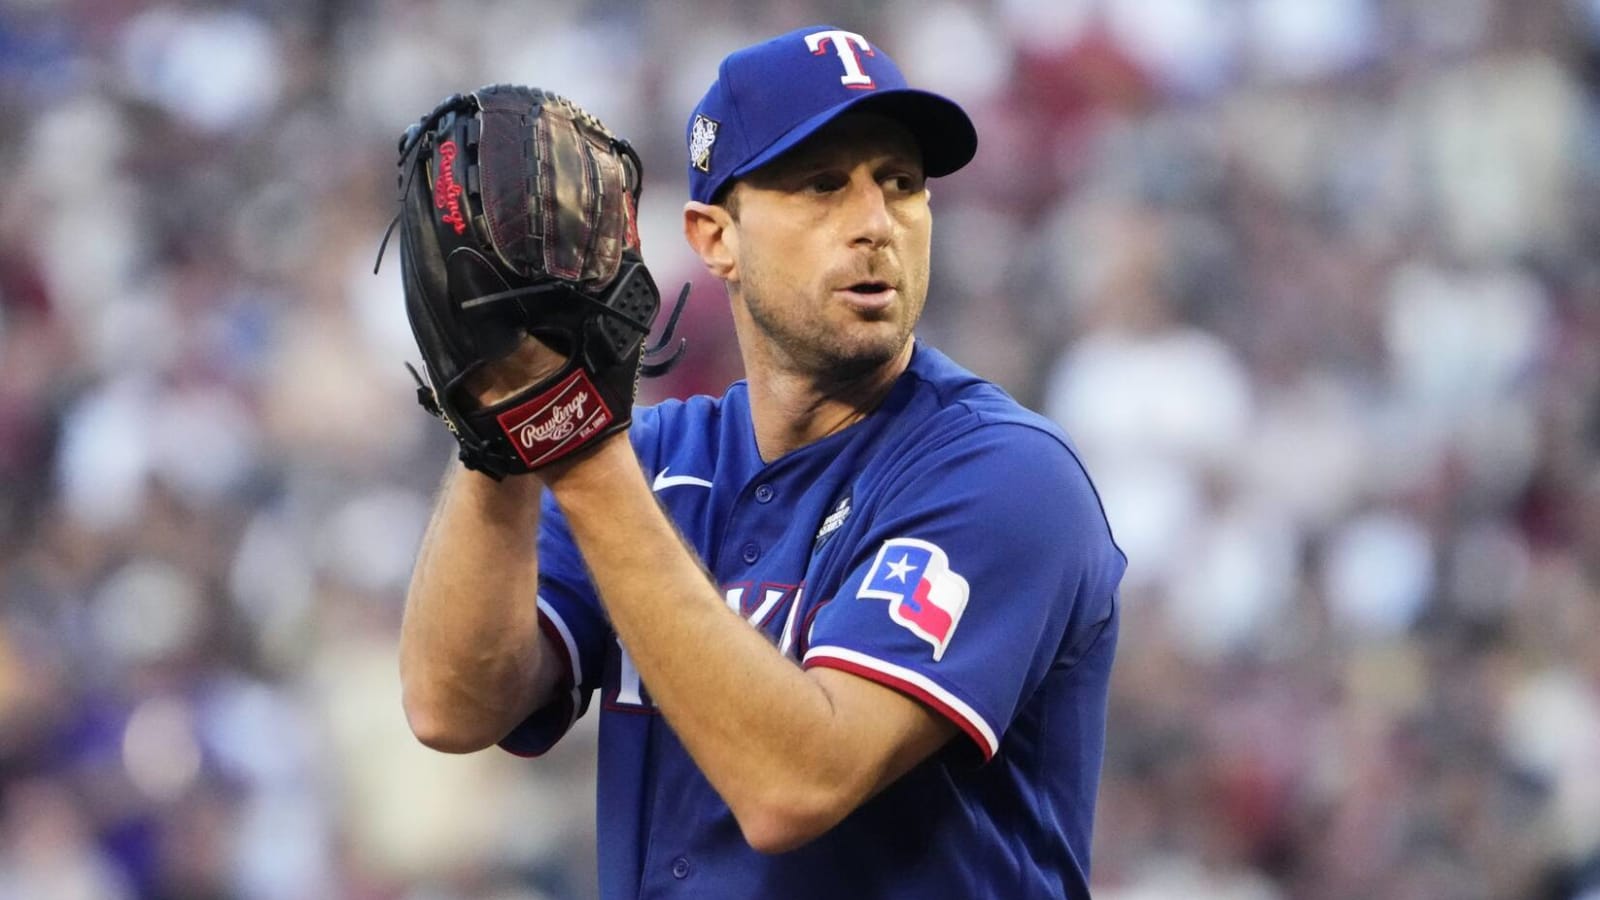 Rangers ace continues to be plagued by thumb injury